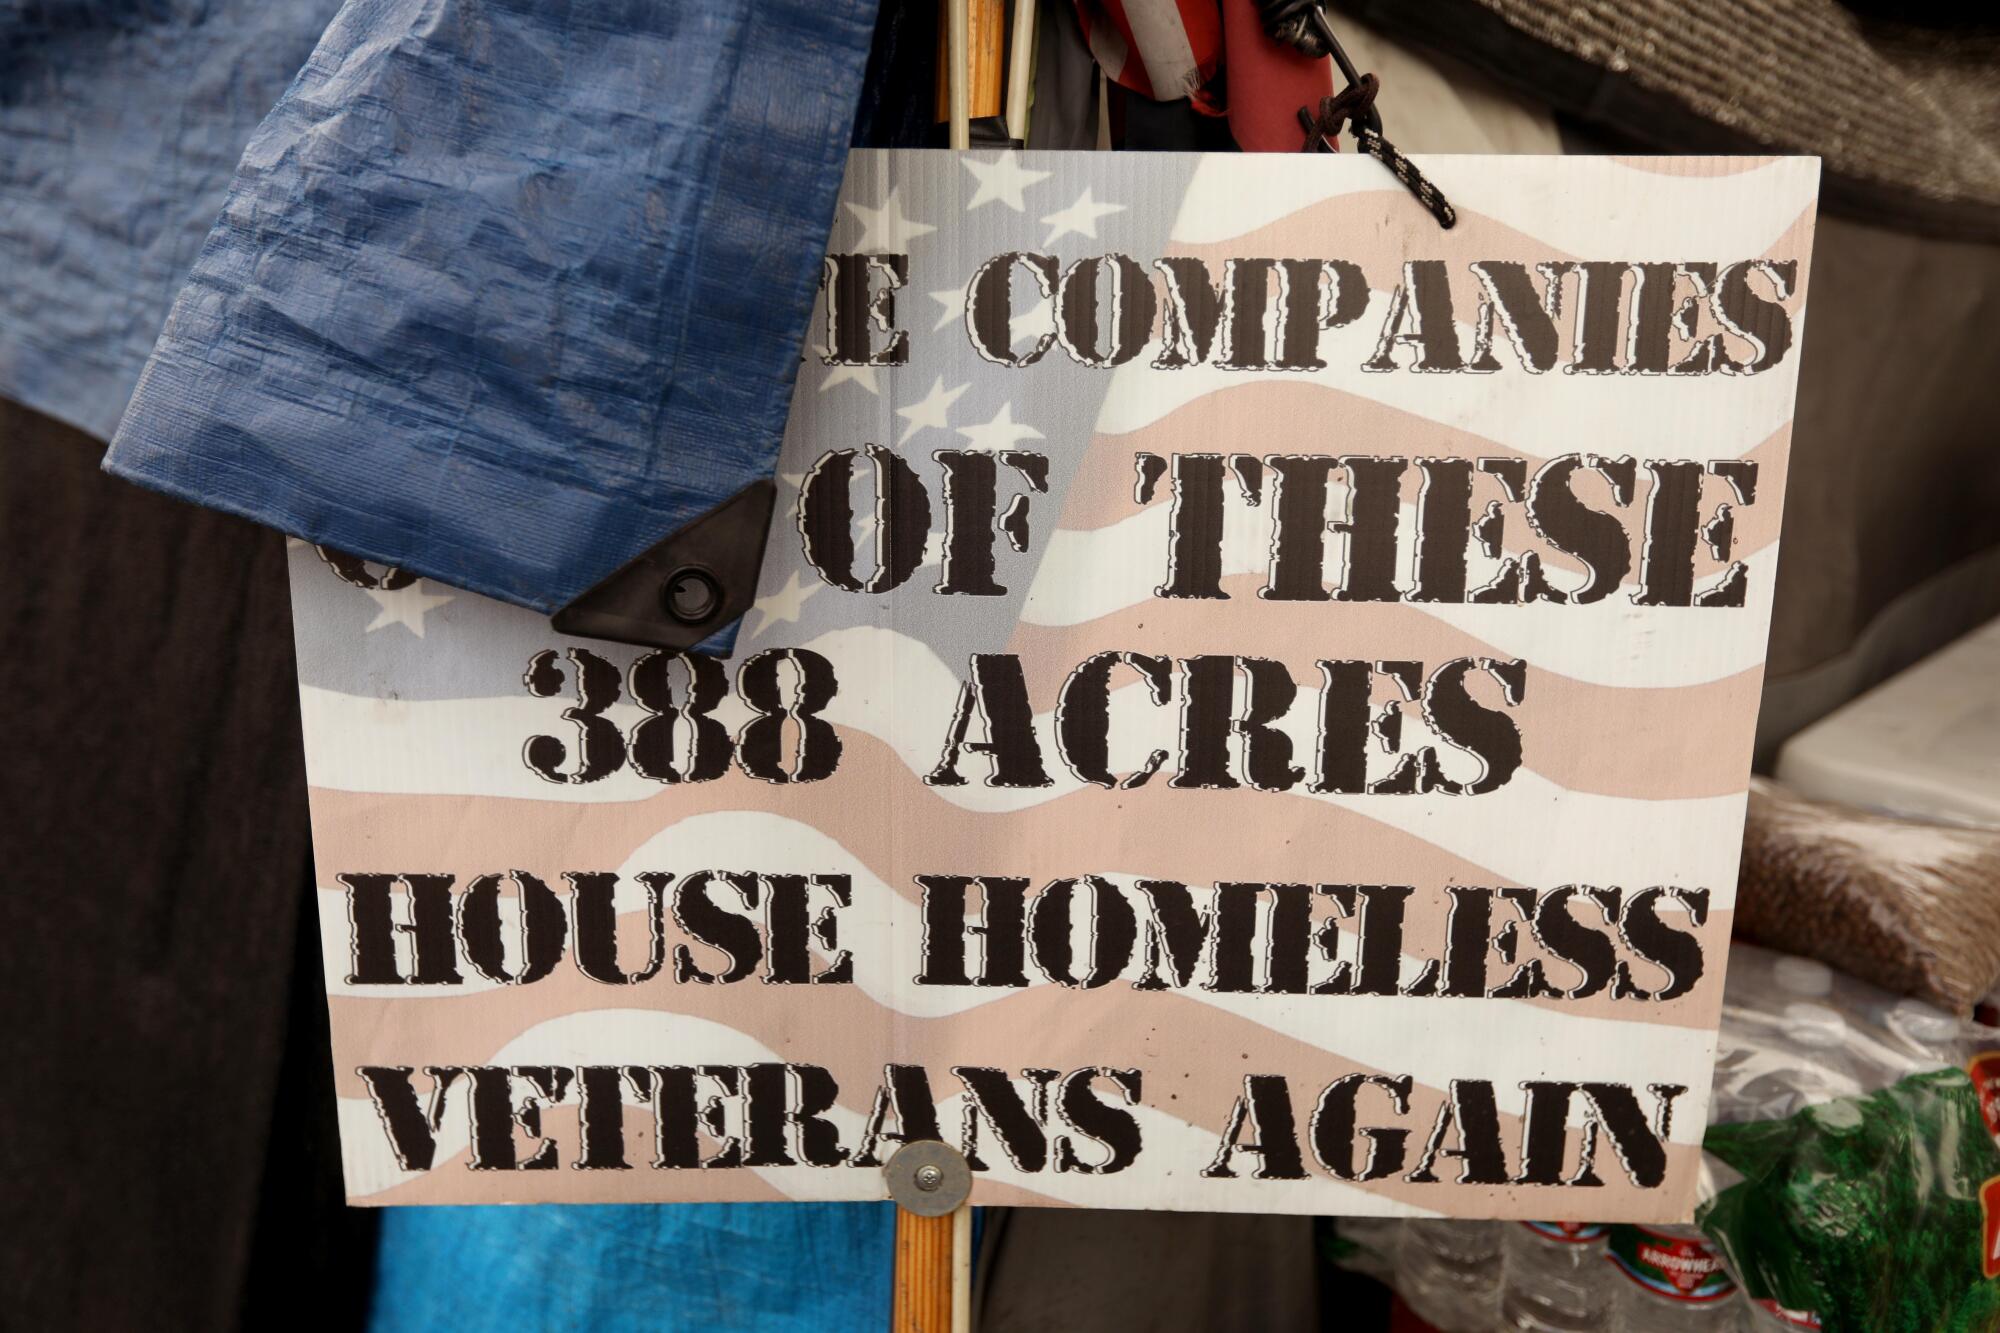 A sign in support of housing homeless vets.